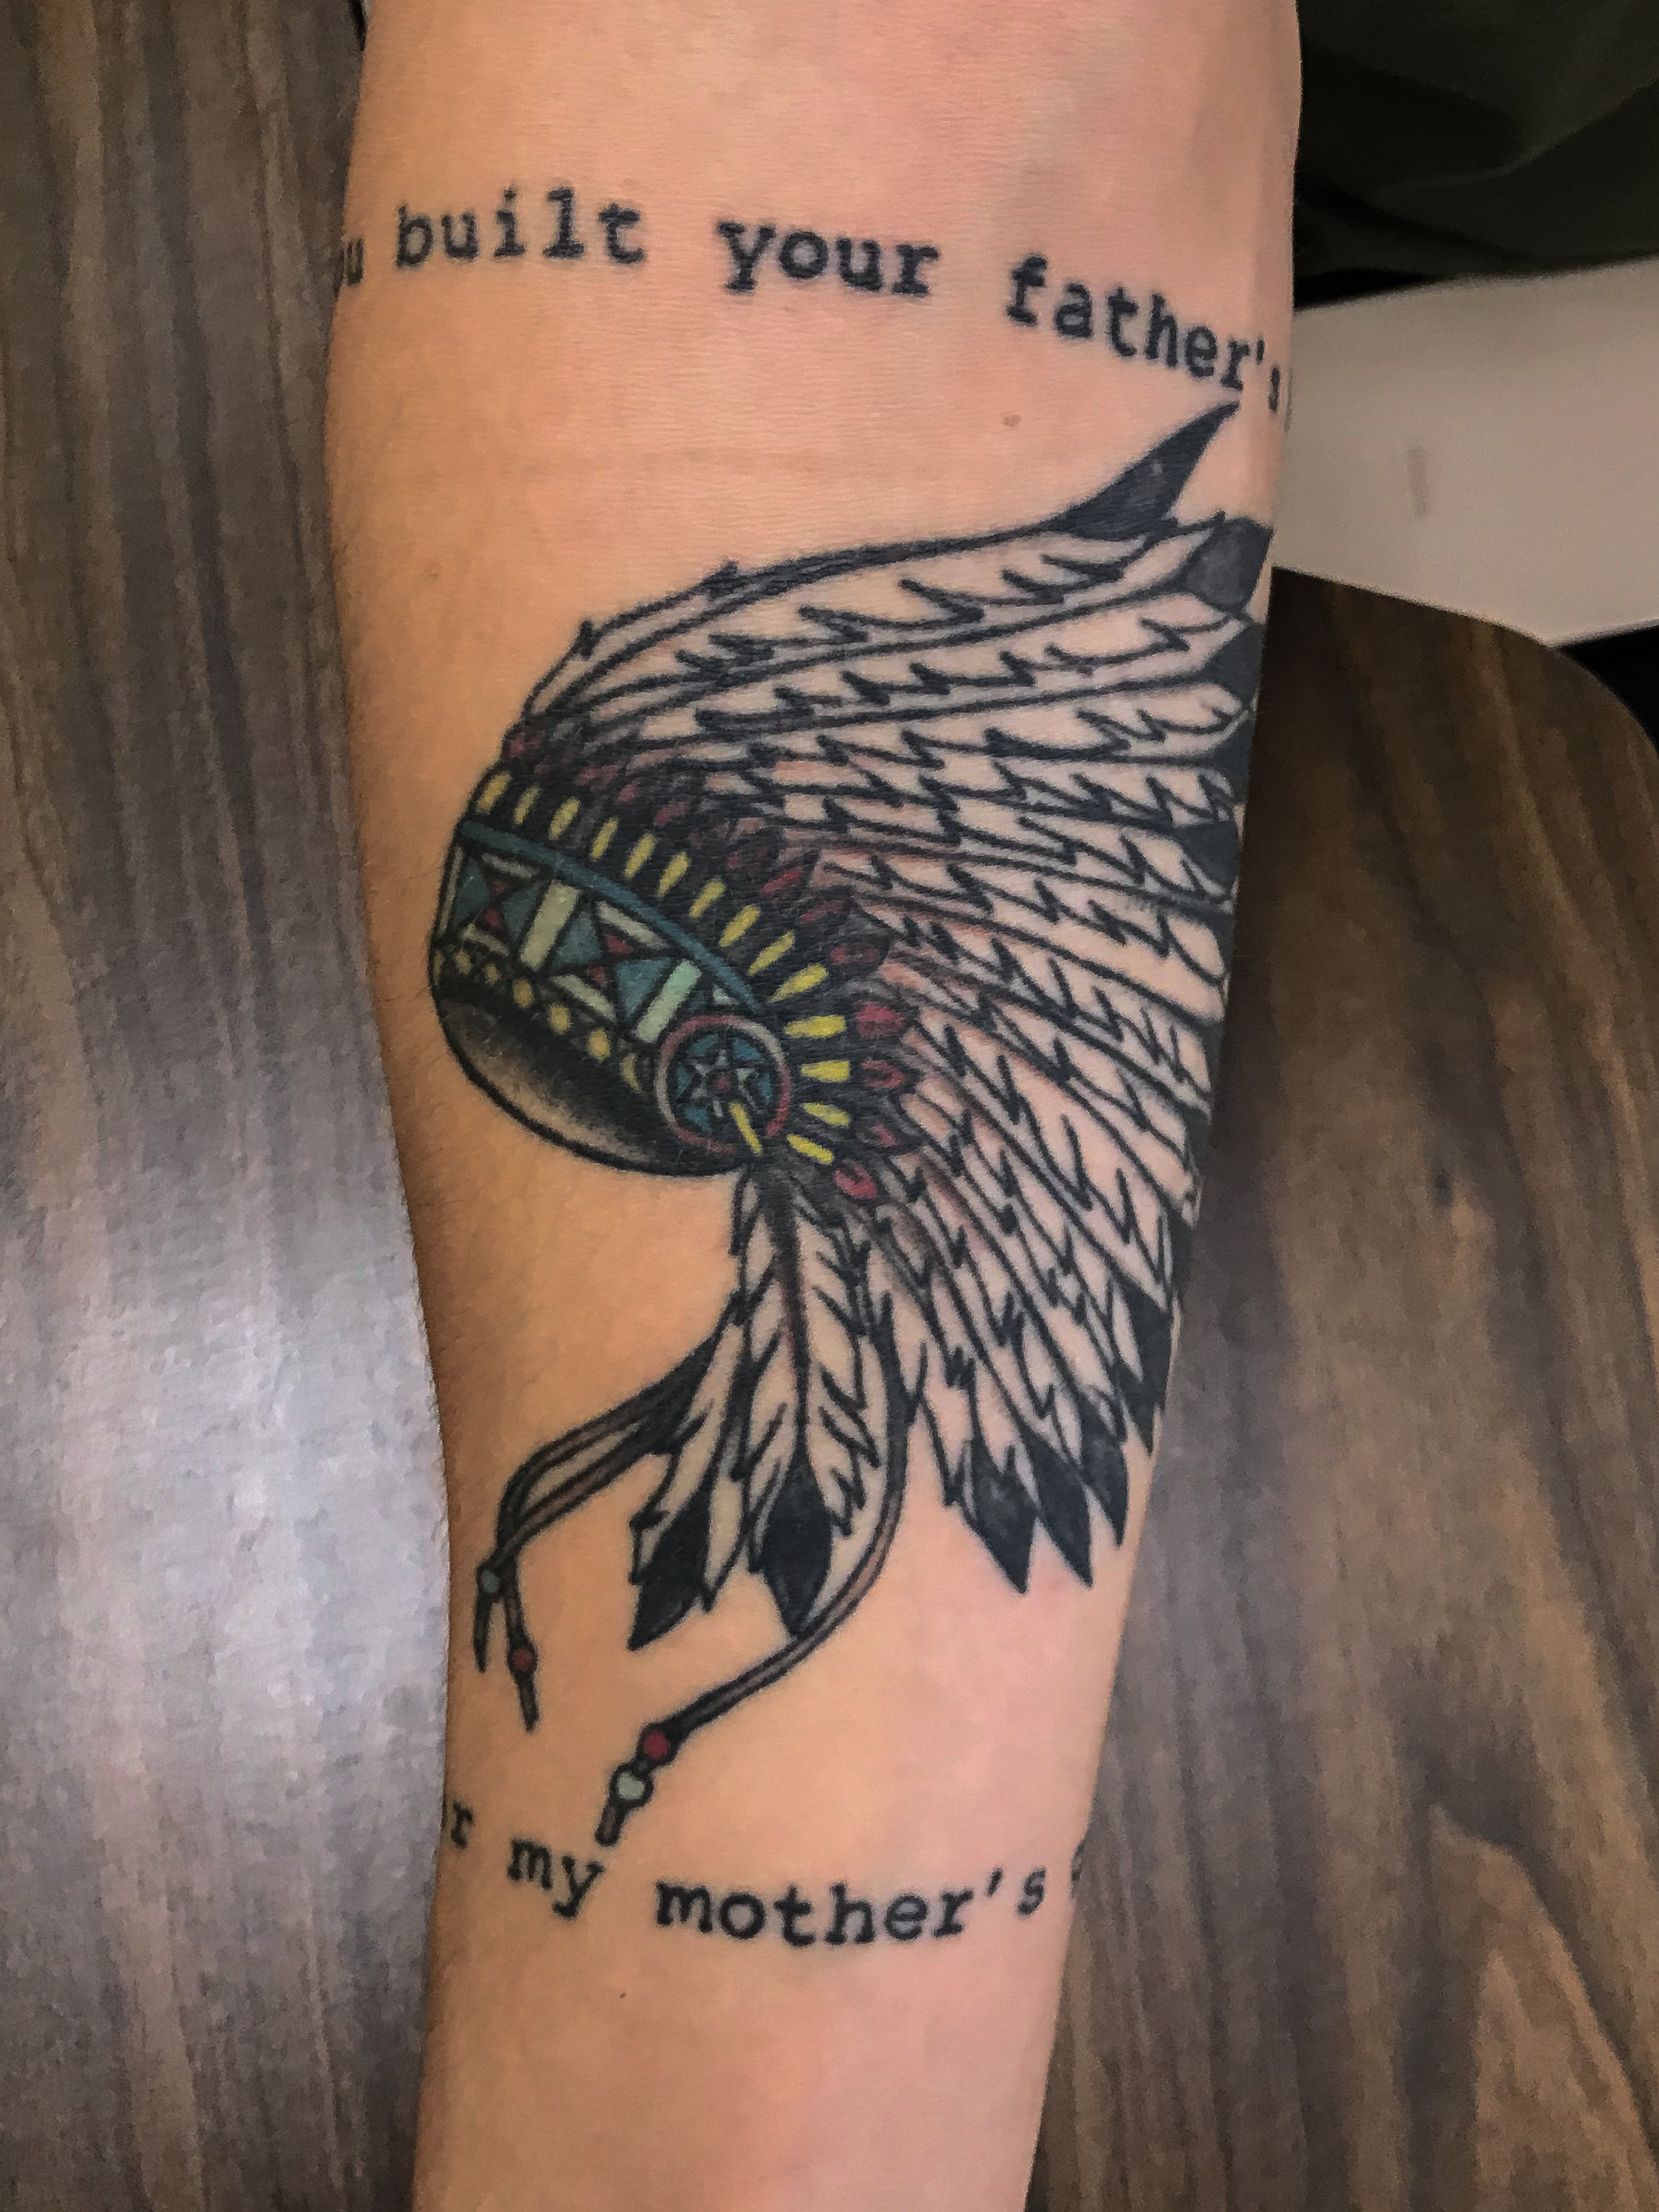 This is Ethan Clarks tattoo on his right forearm. The writing is lyrics that say, You built your fathers tomb on my mothers grave. Clark got this tattoo to represent Manifest Destiny during Westward Expansion. Being a member of the army, this w